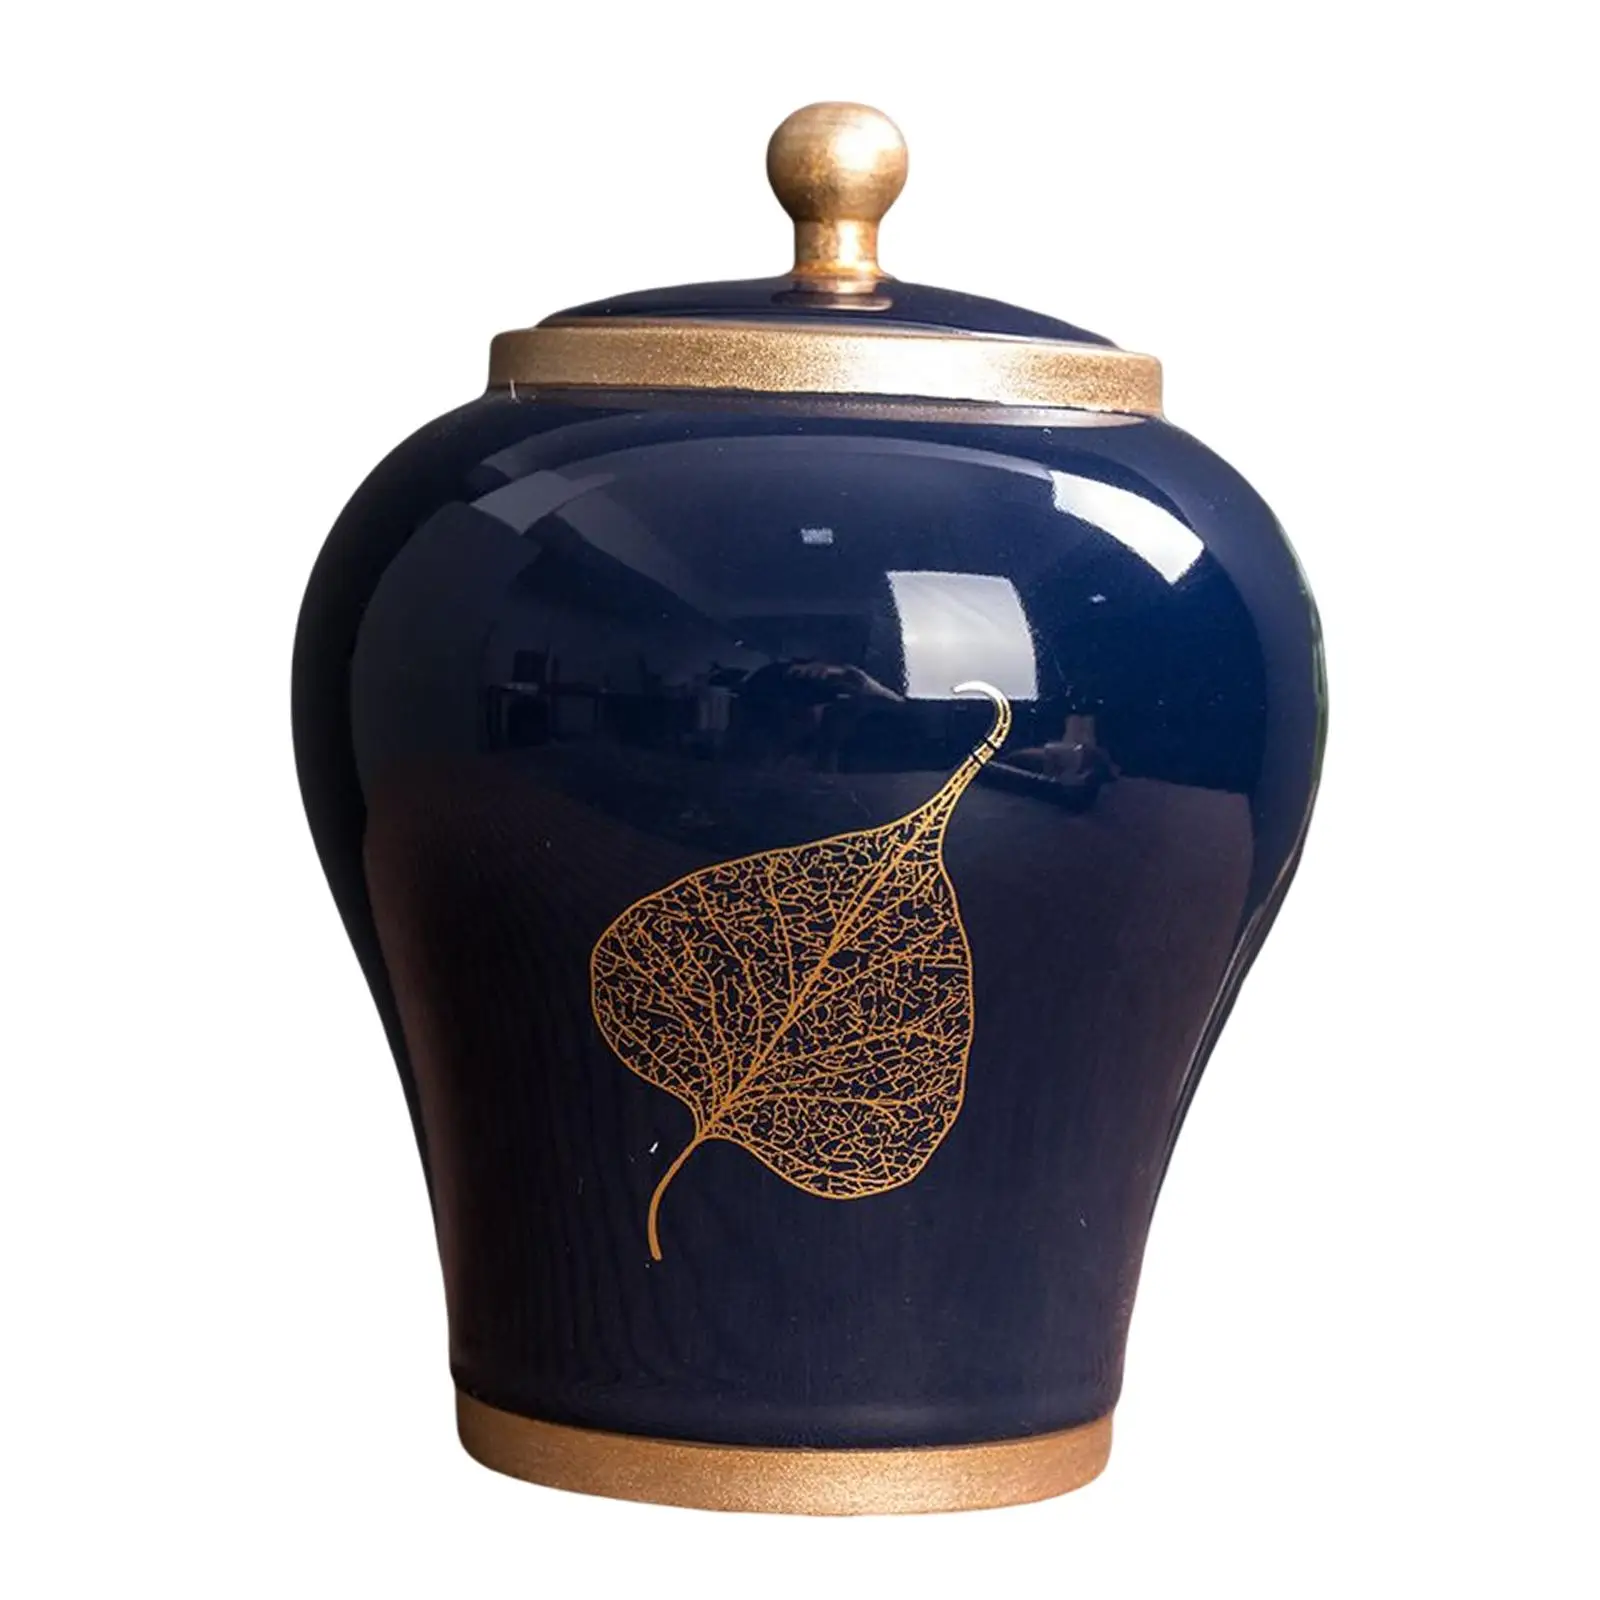 Ceramic Ginger Jar Decorative Vase Can Traditional Tea Caddy with Lid for